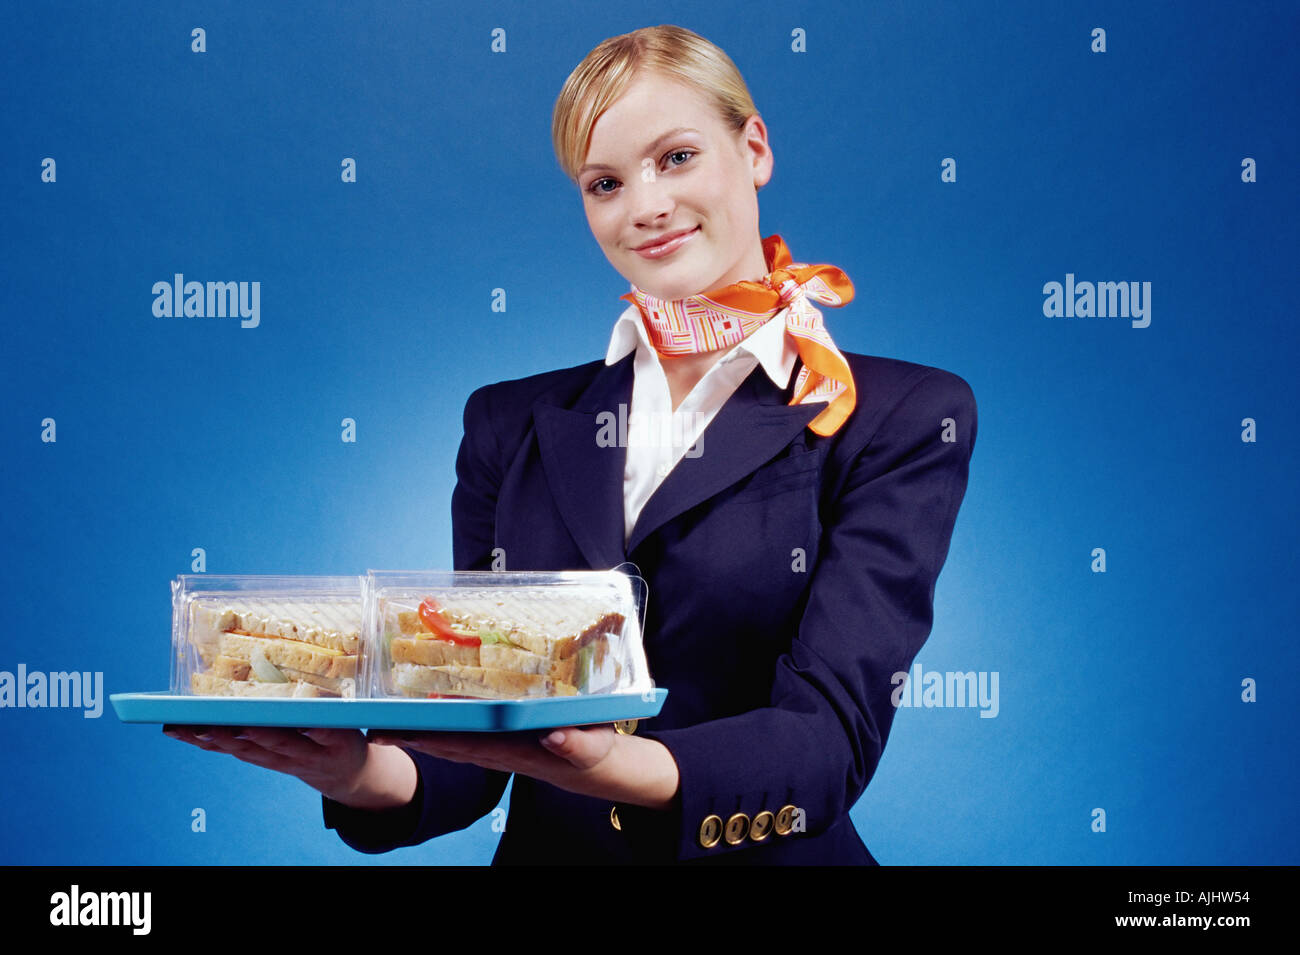 Air hostess holding a tray of sandwiches Stock Photo